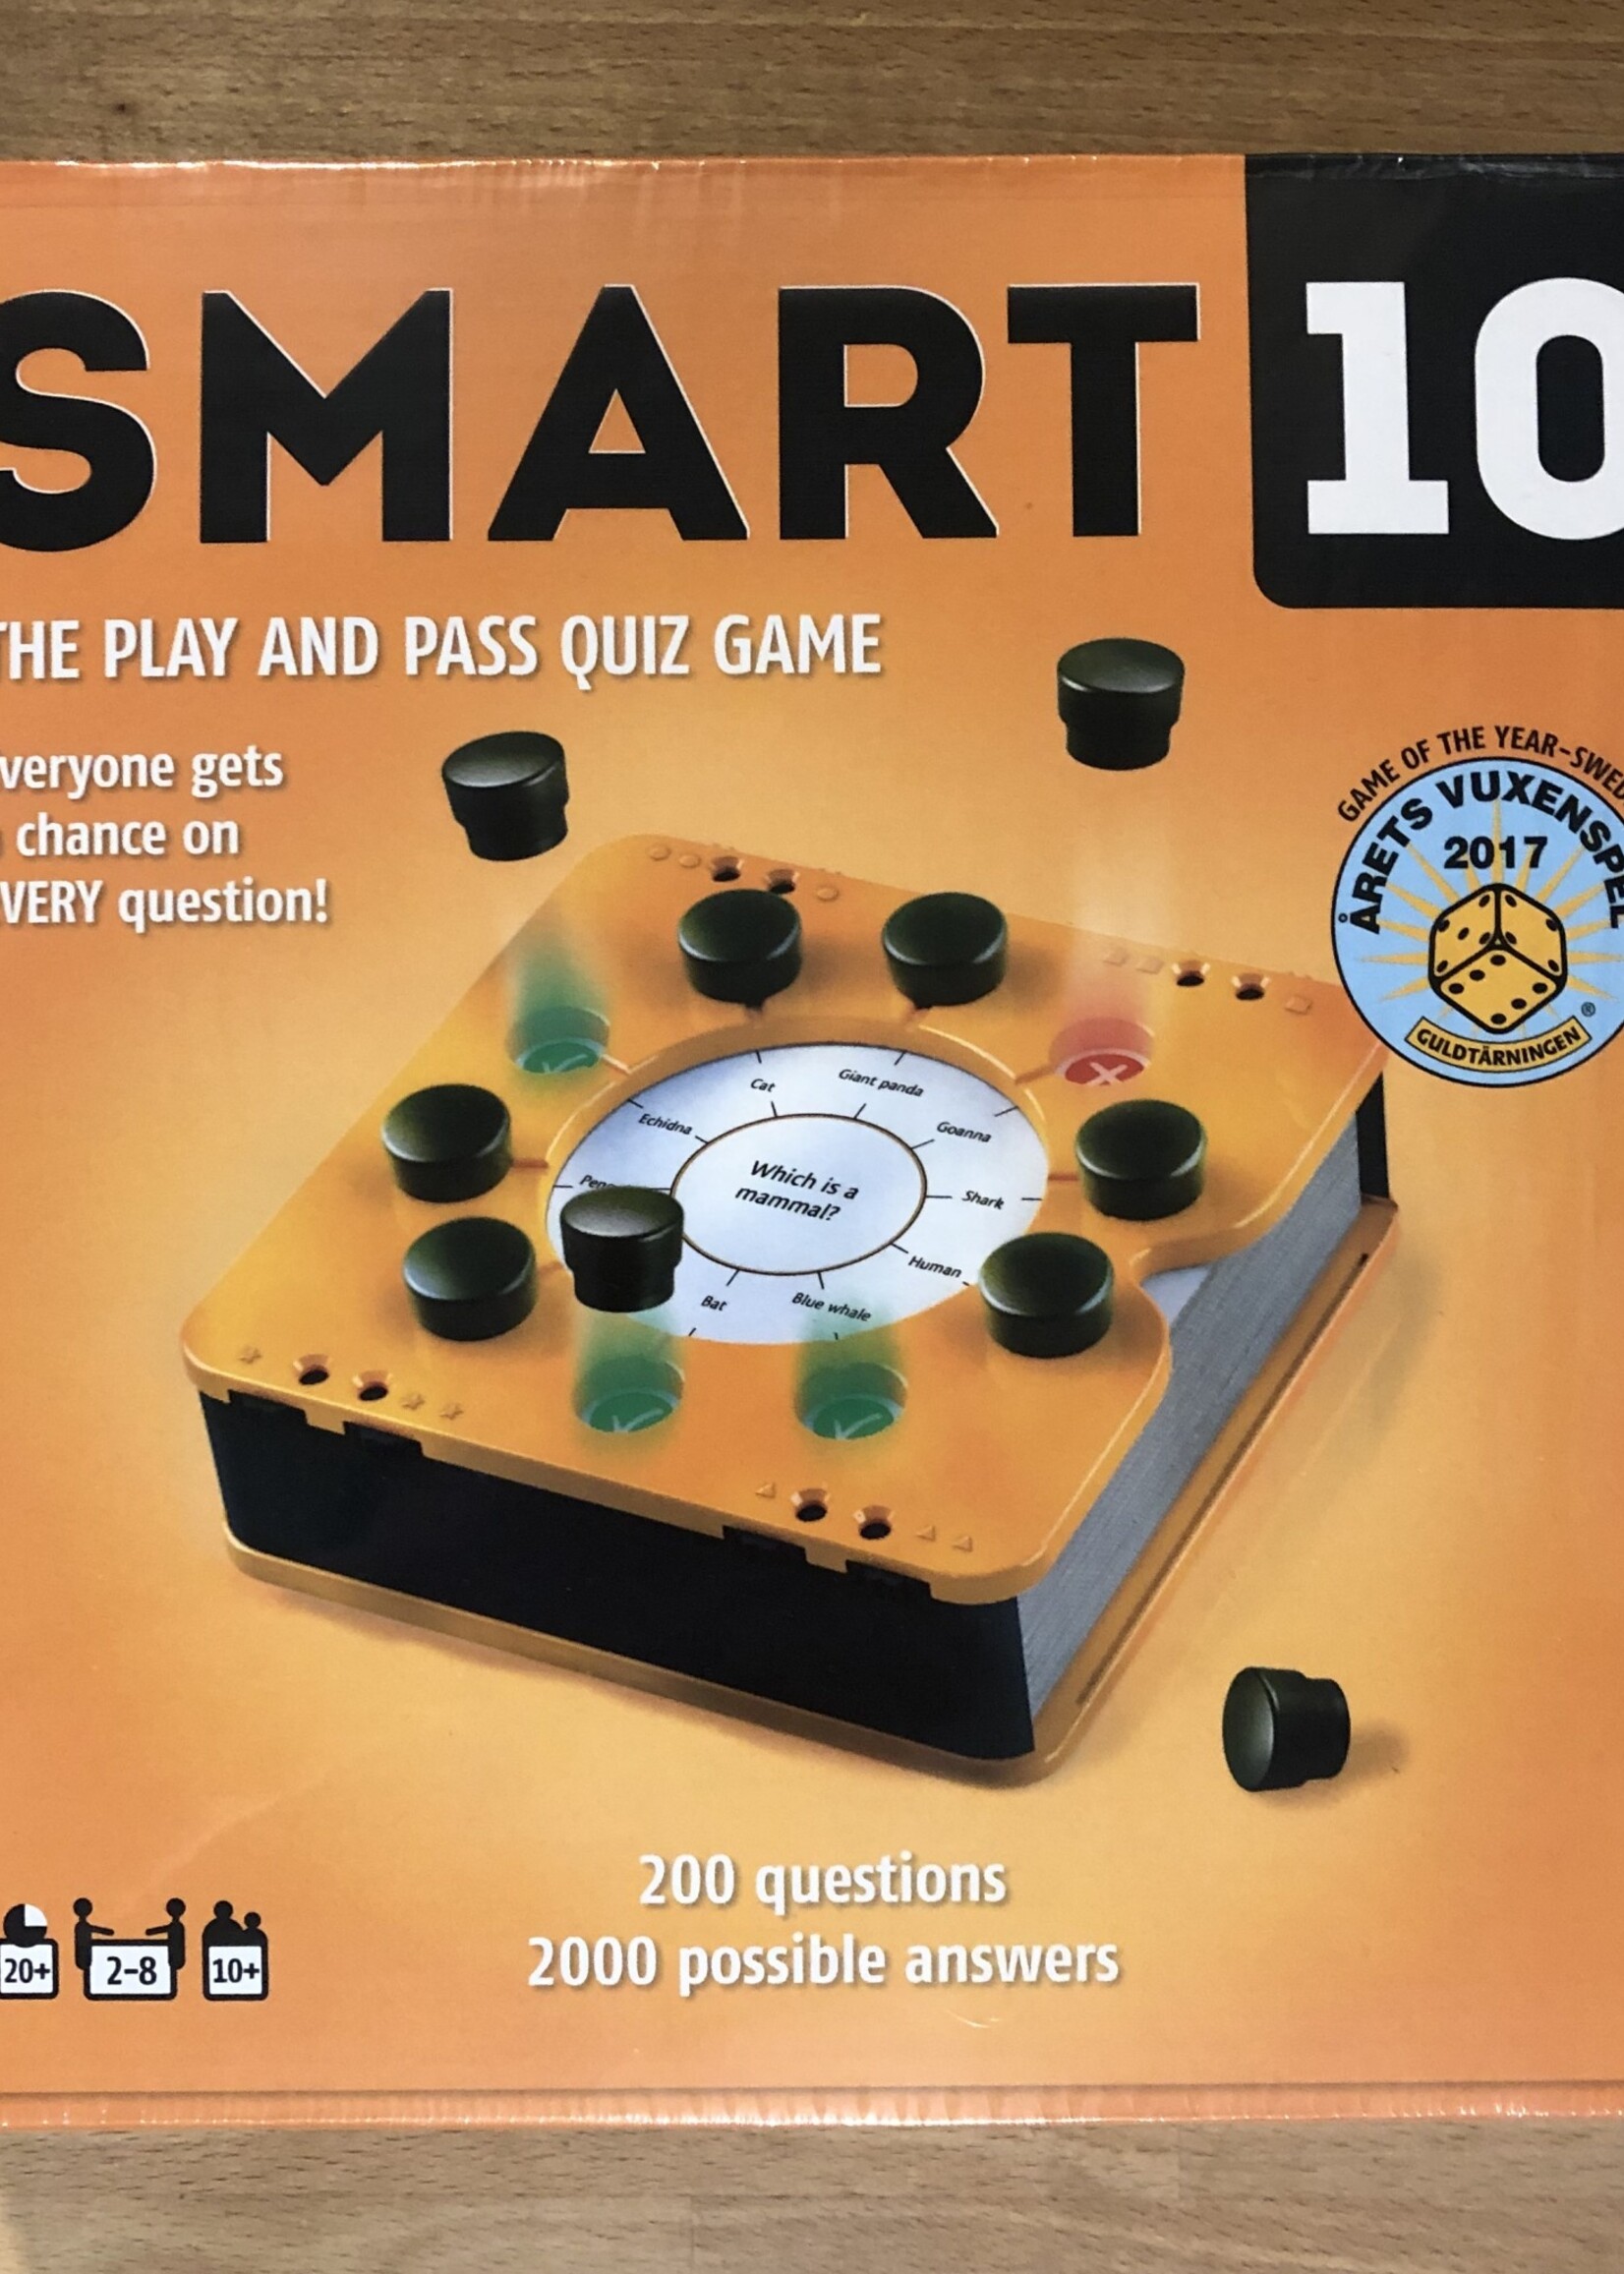 Game - Smart 10